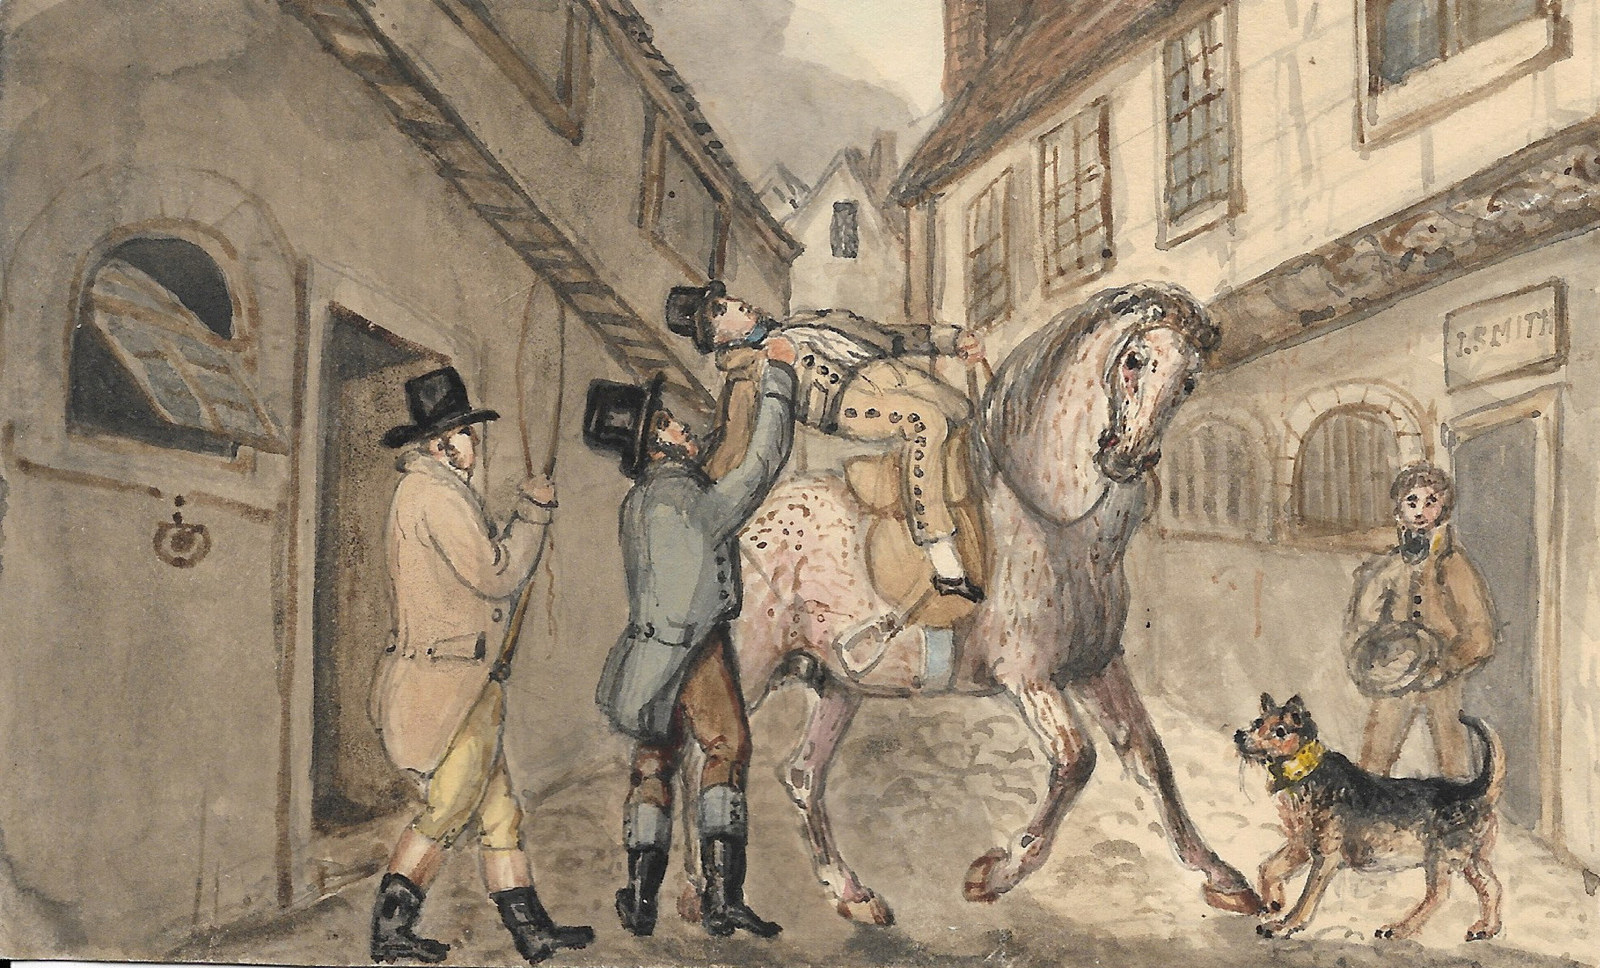 Illustration no.17: Margaret taken into custody in the act of selling the horse / Richard Cobbold